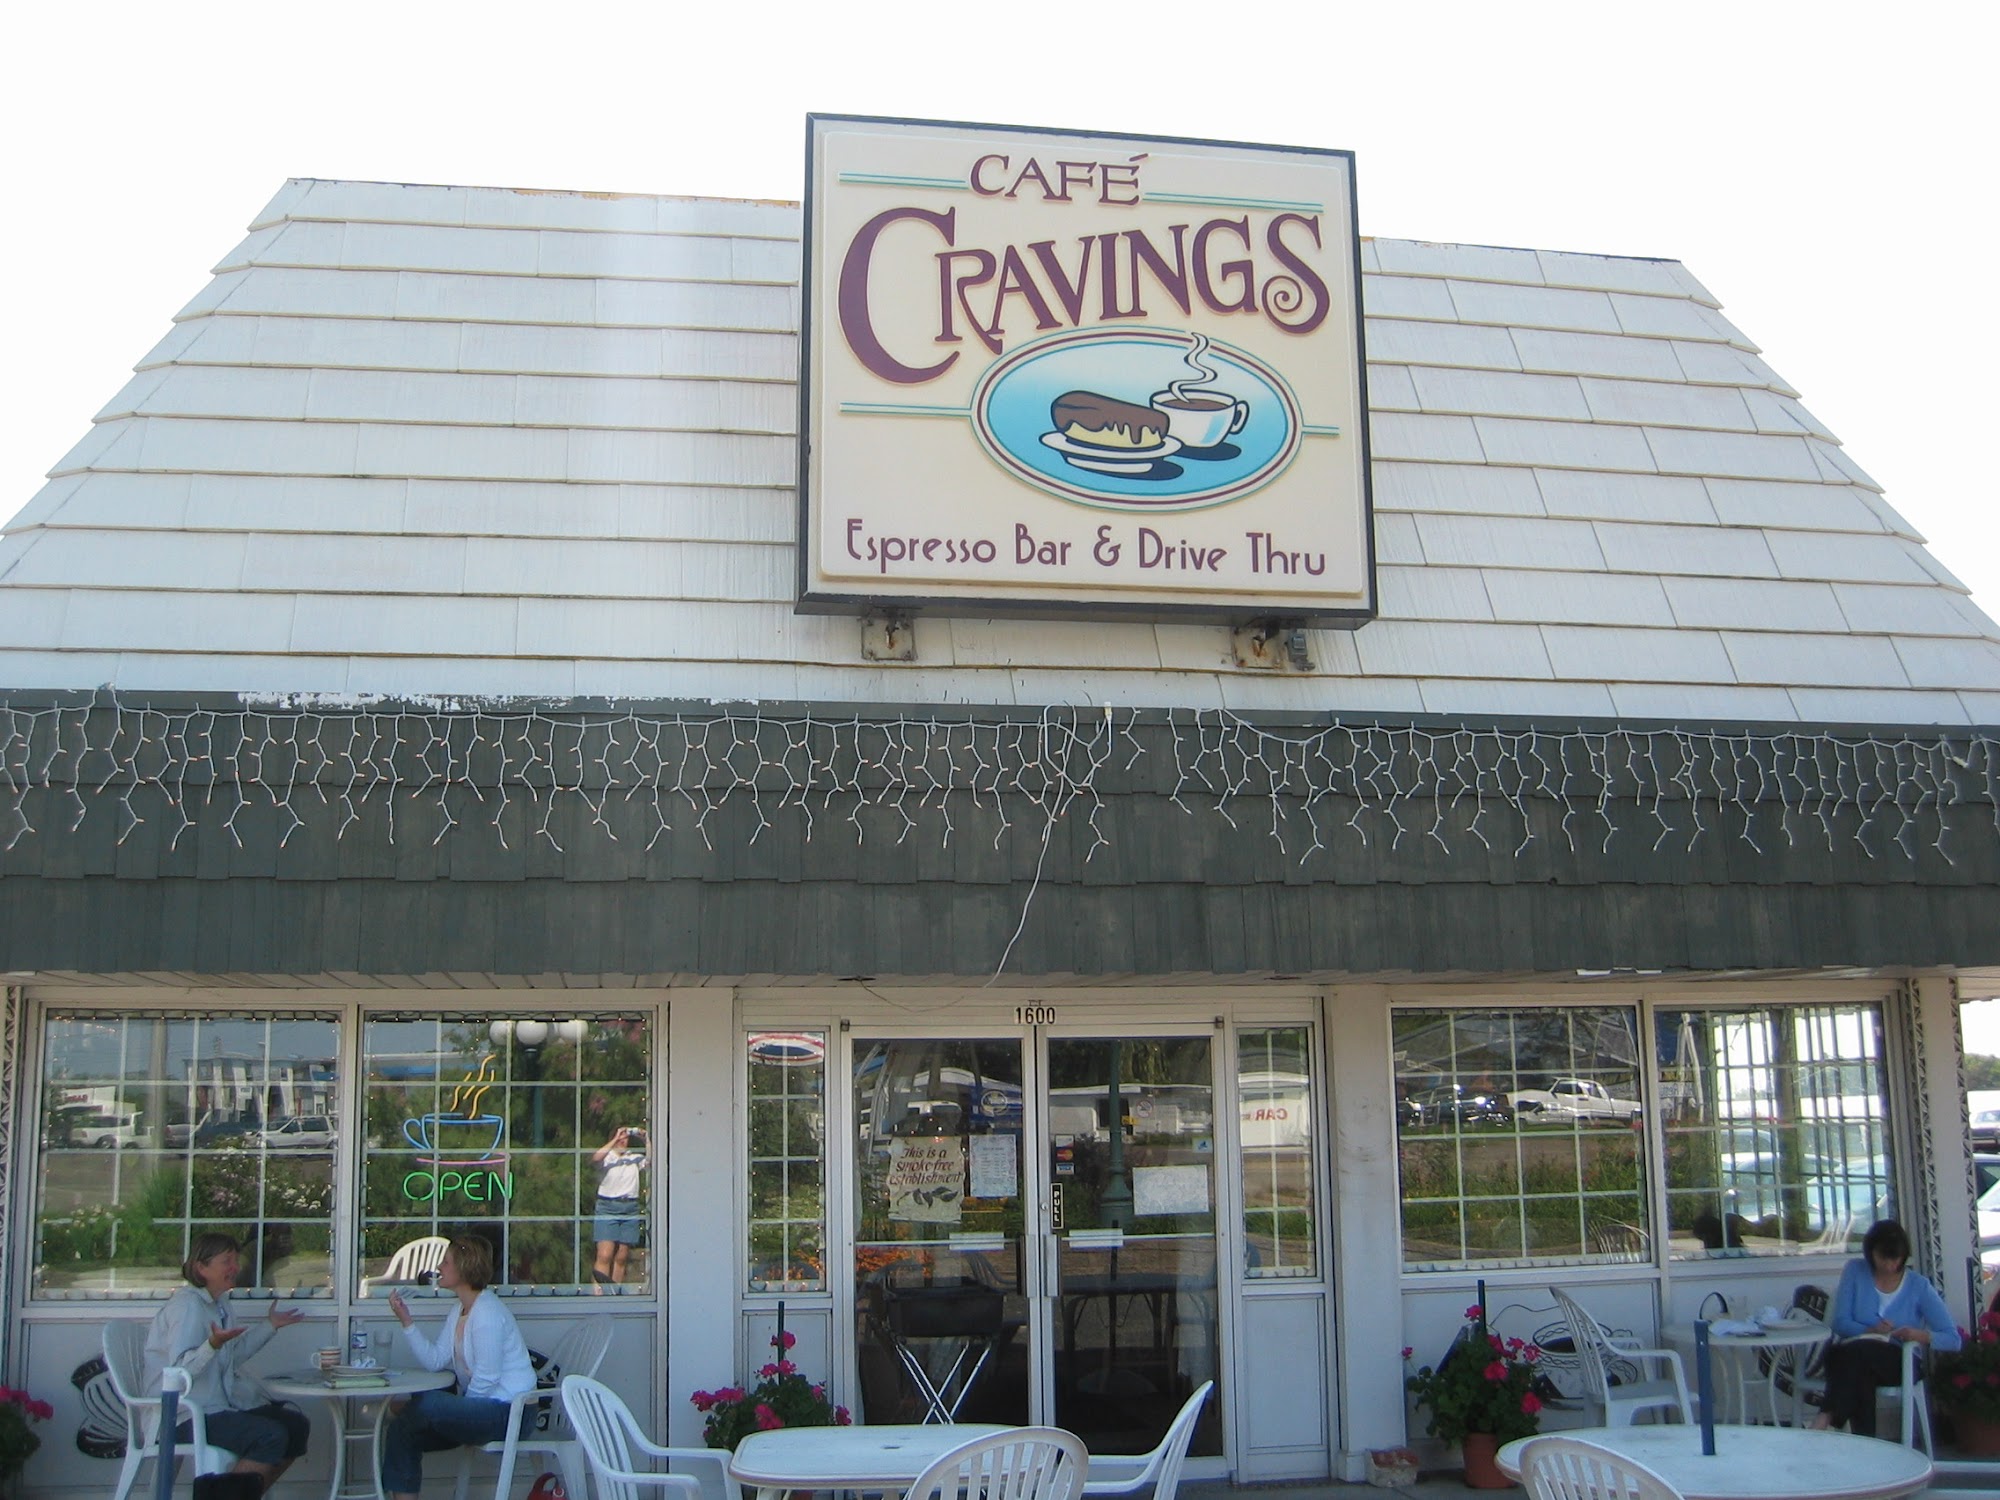 Cafe Cravings